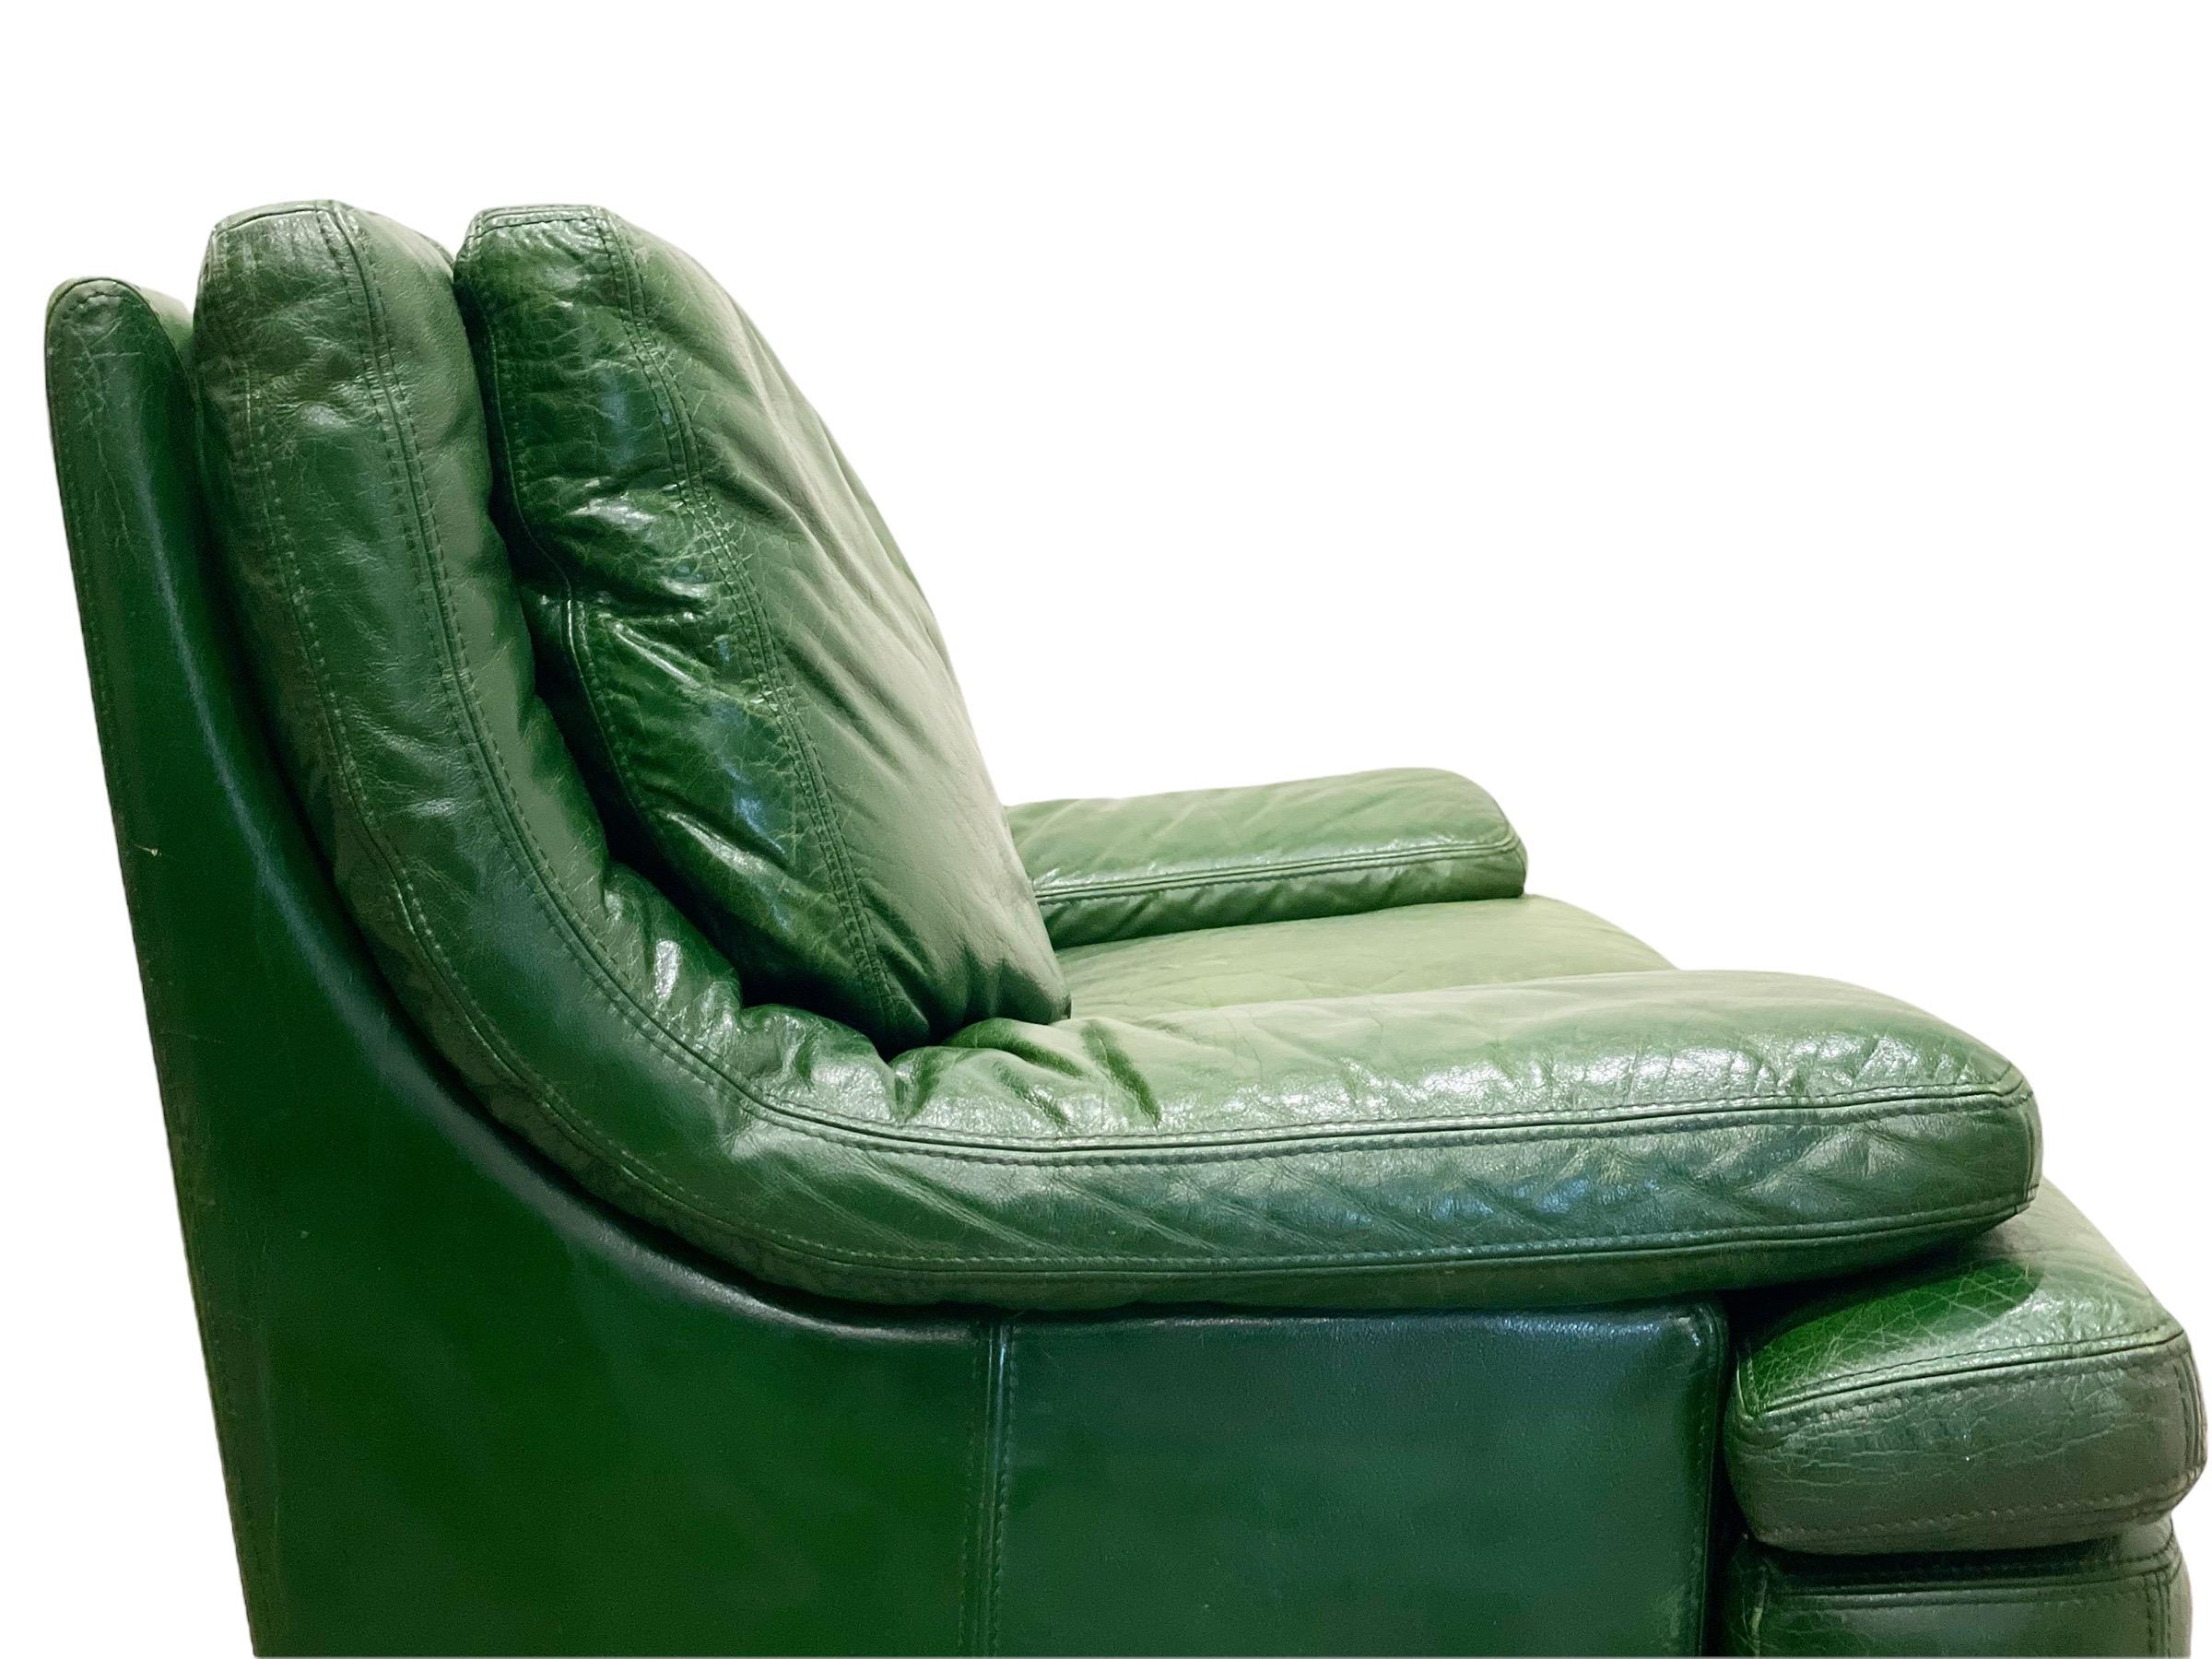 French Roche Bobois Vintage Post Modern Green Leather Sofa and Loveseat, circa 1987